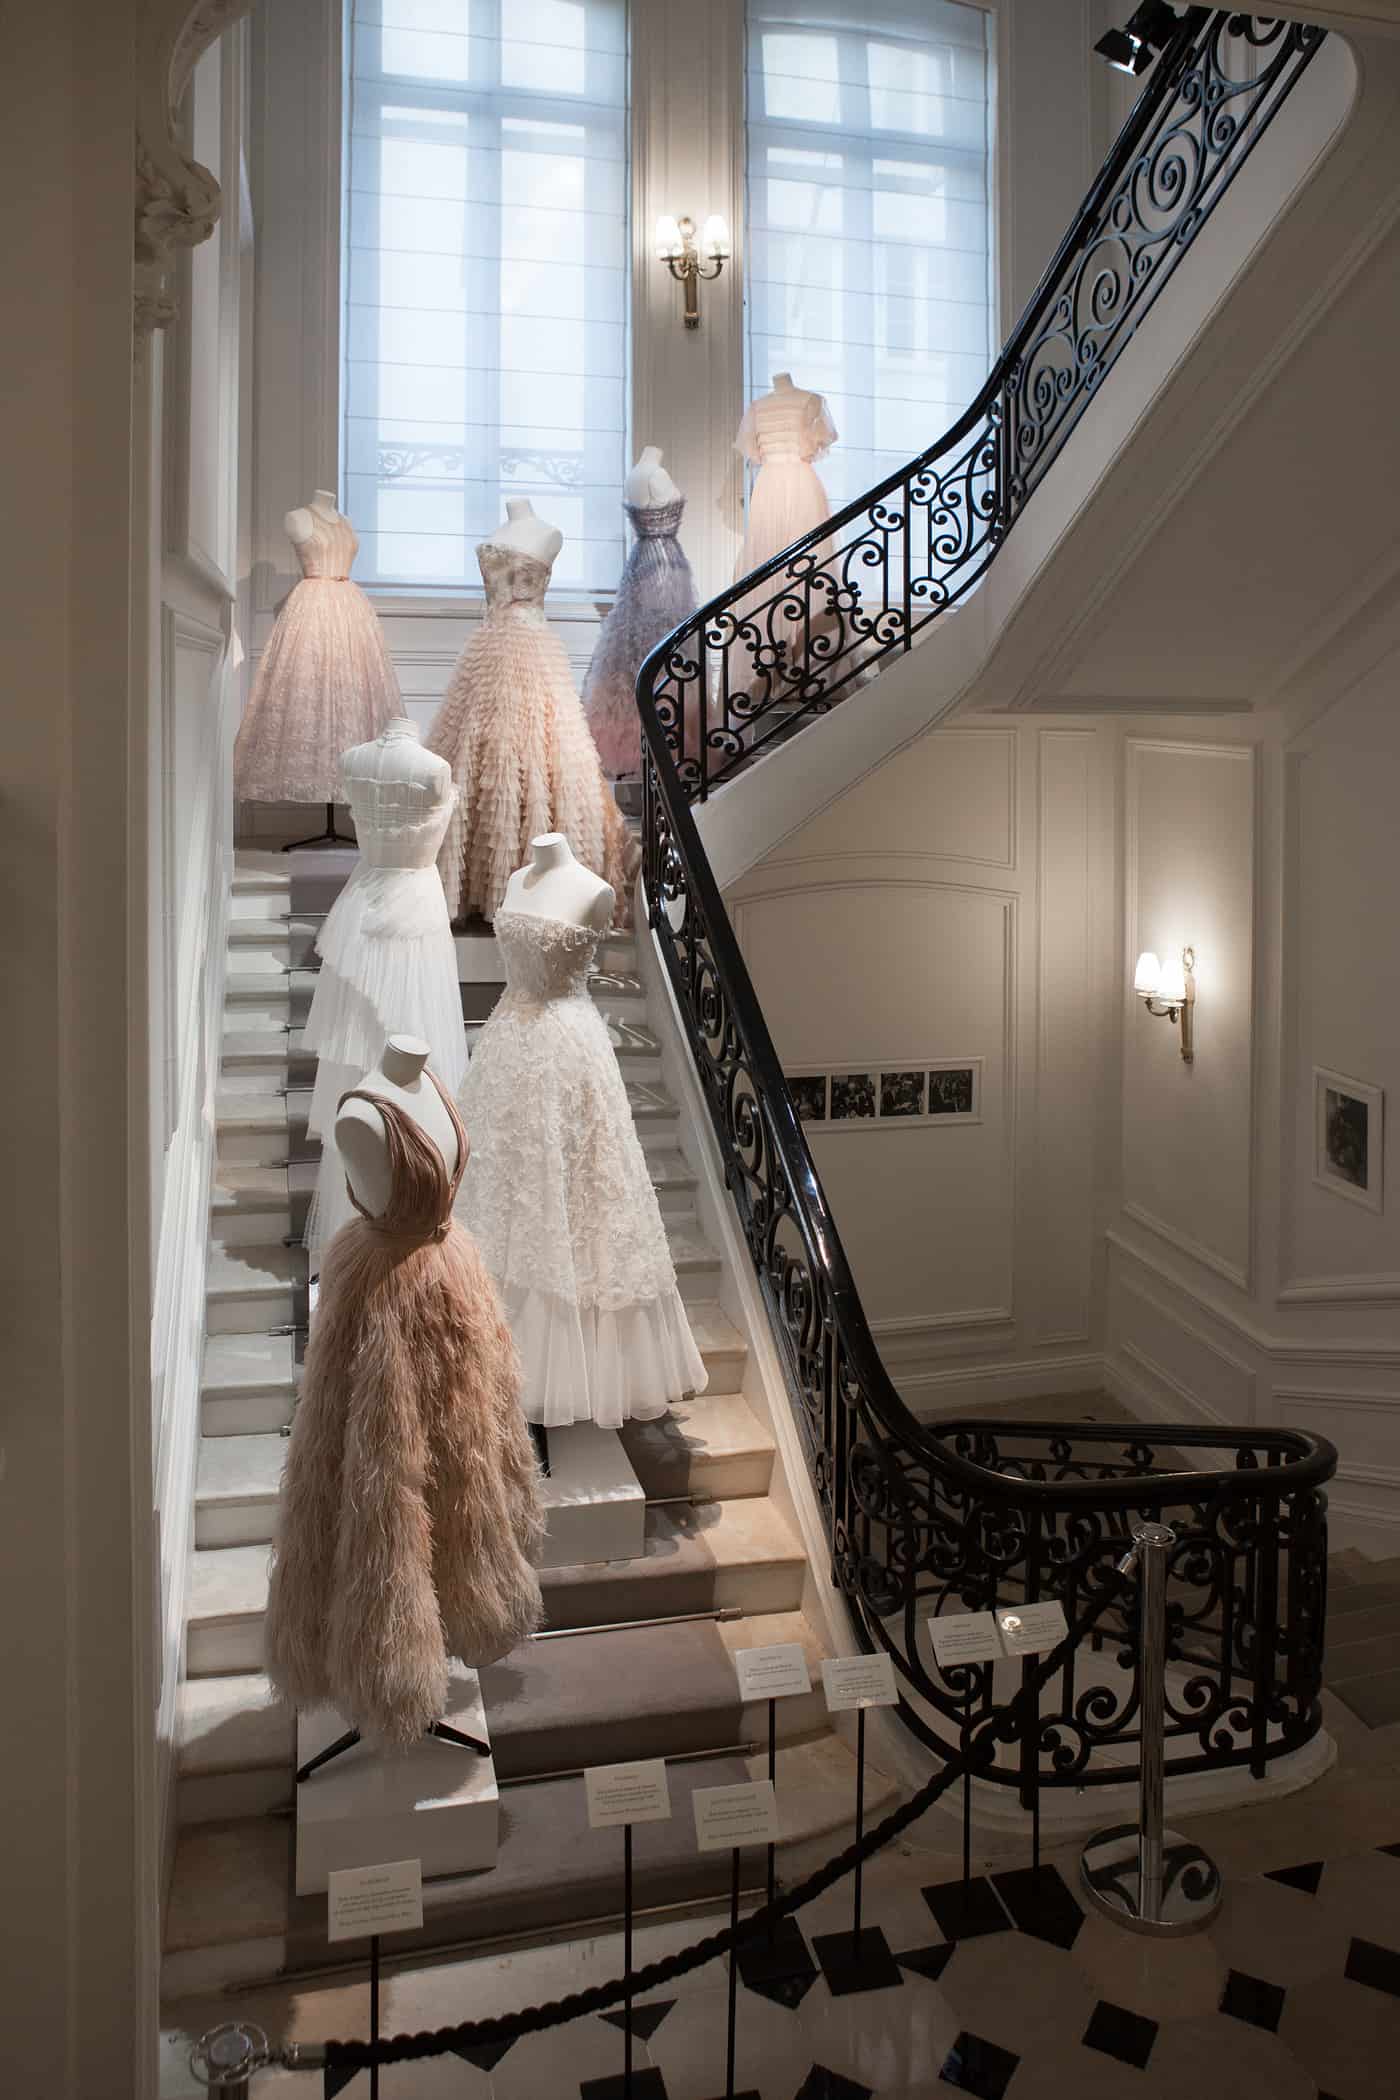 Inside the Making of Dior's Haute Couture Looks